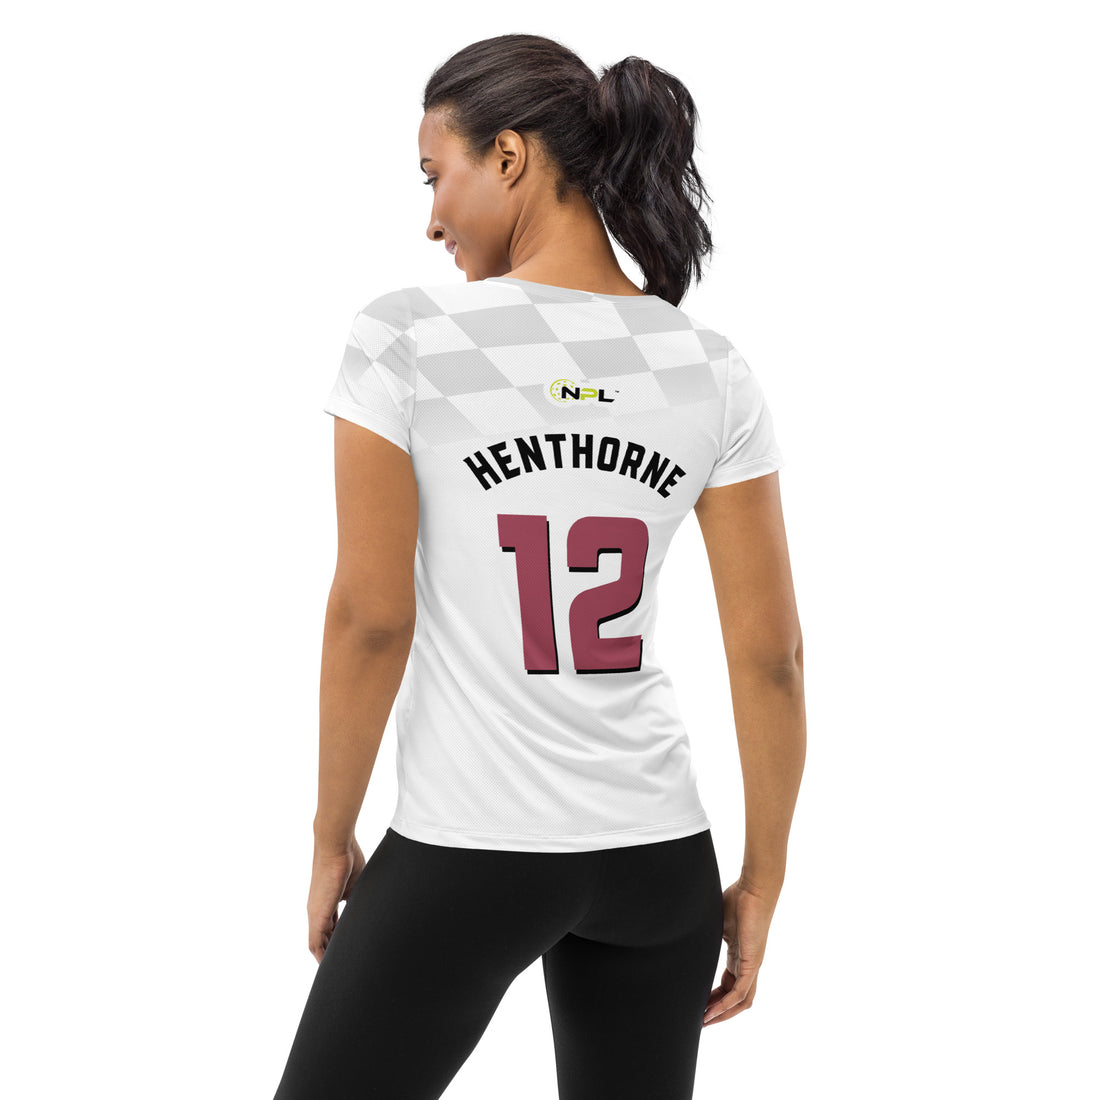 Mary Beth Henthorne 12 Indy Drivers™ SKYblue 2023 Authentic Jersey - White